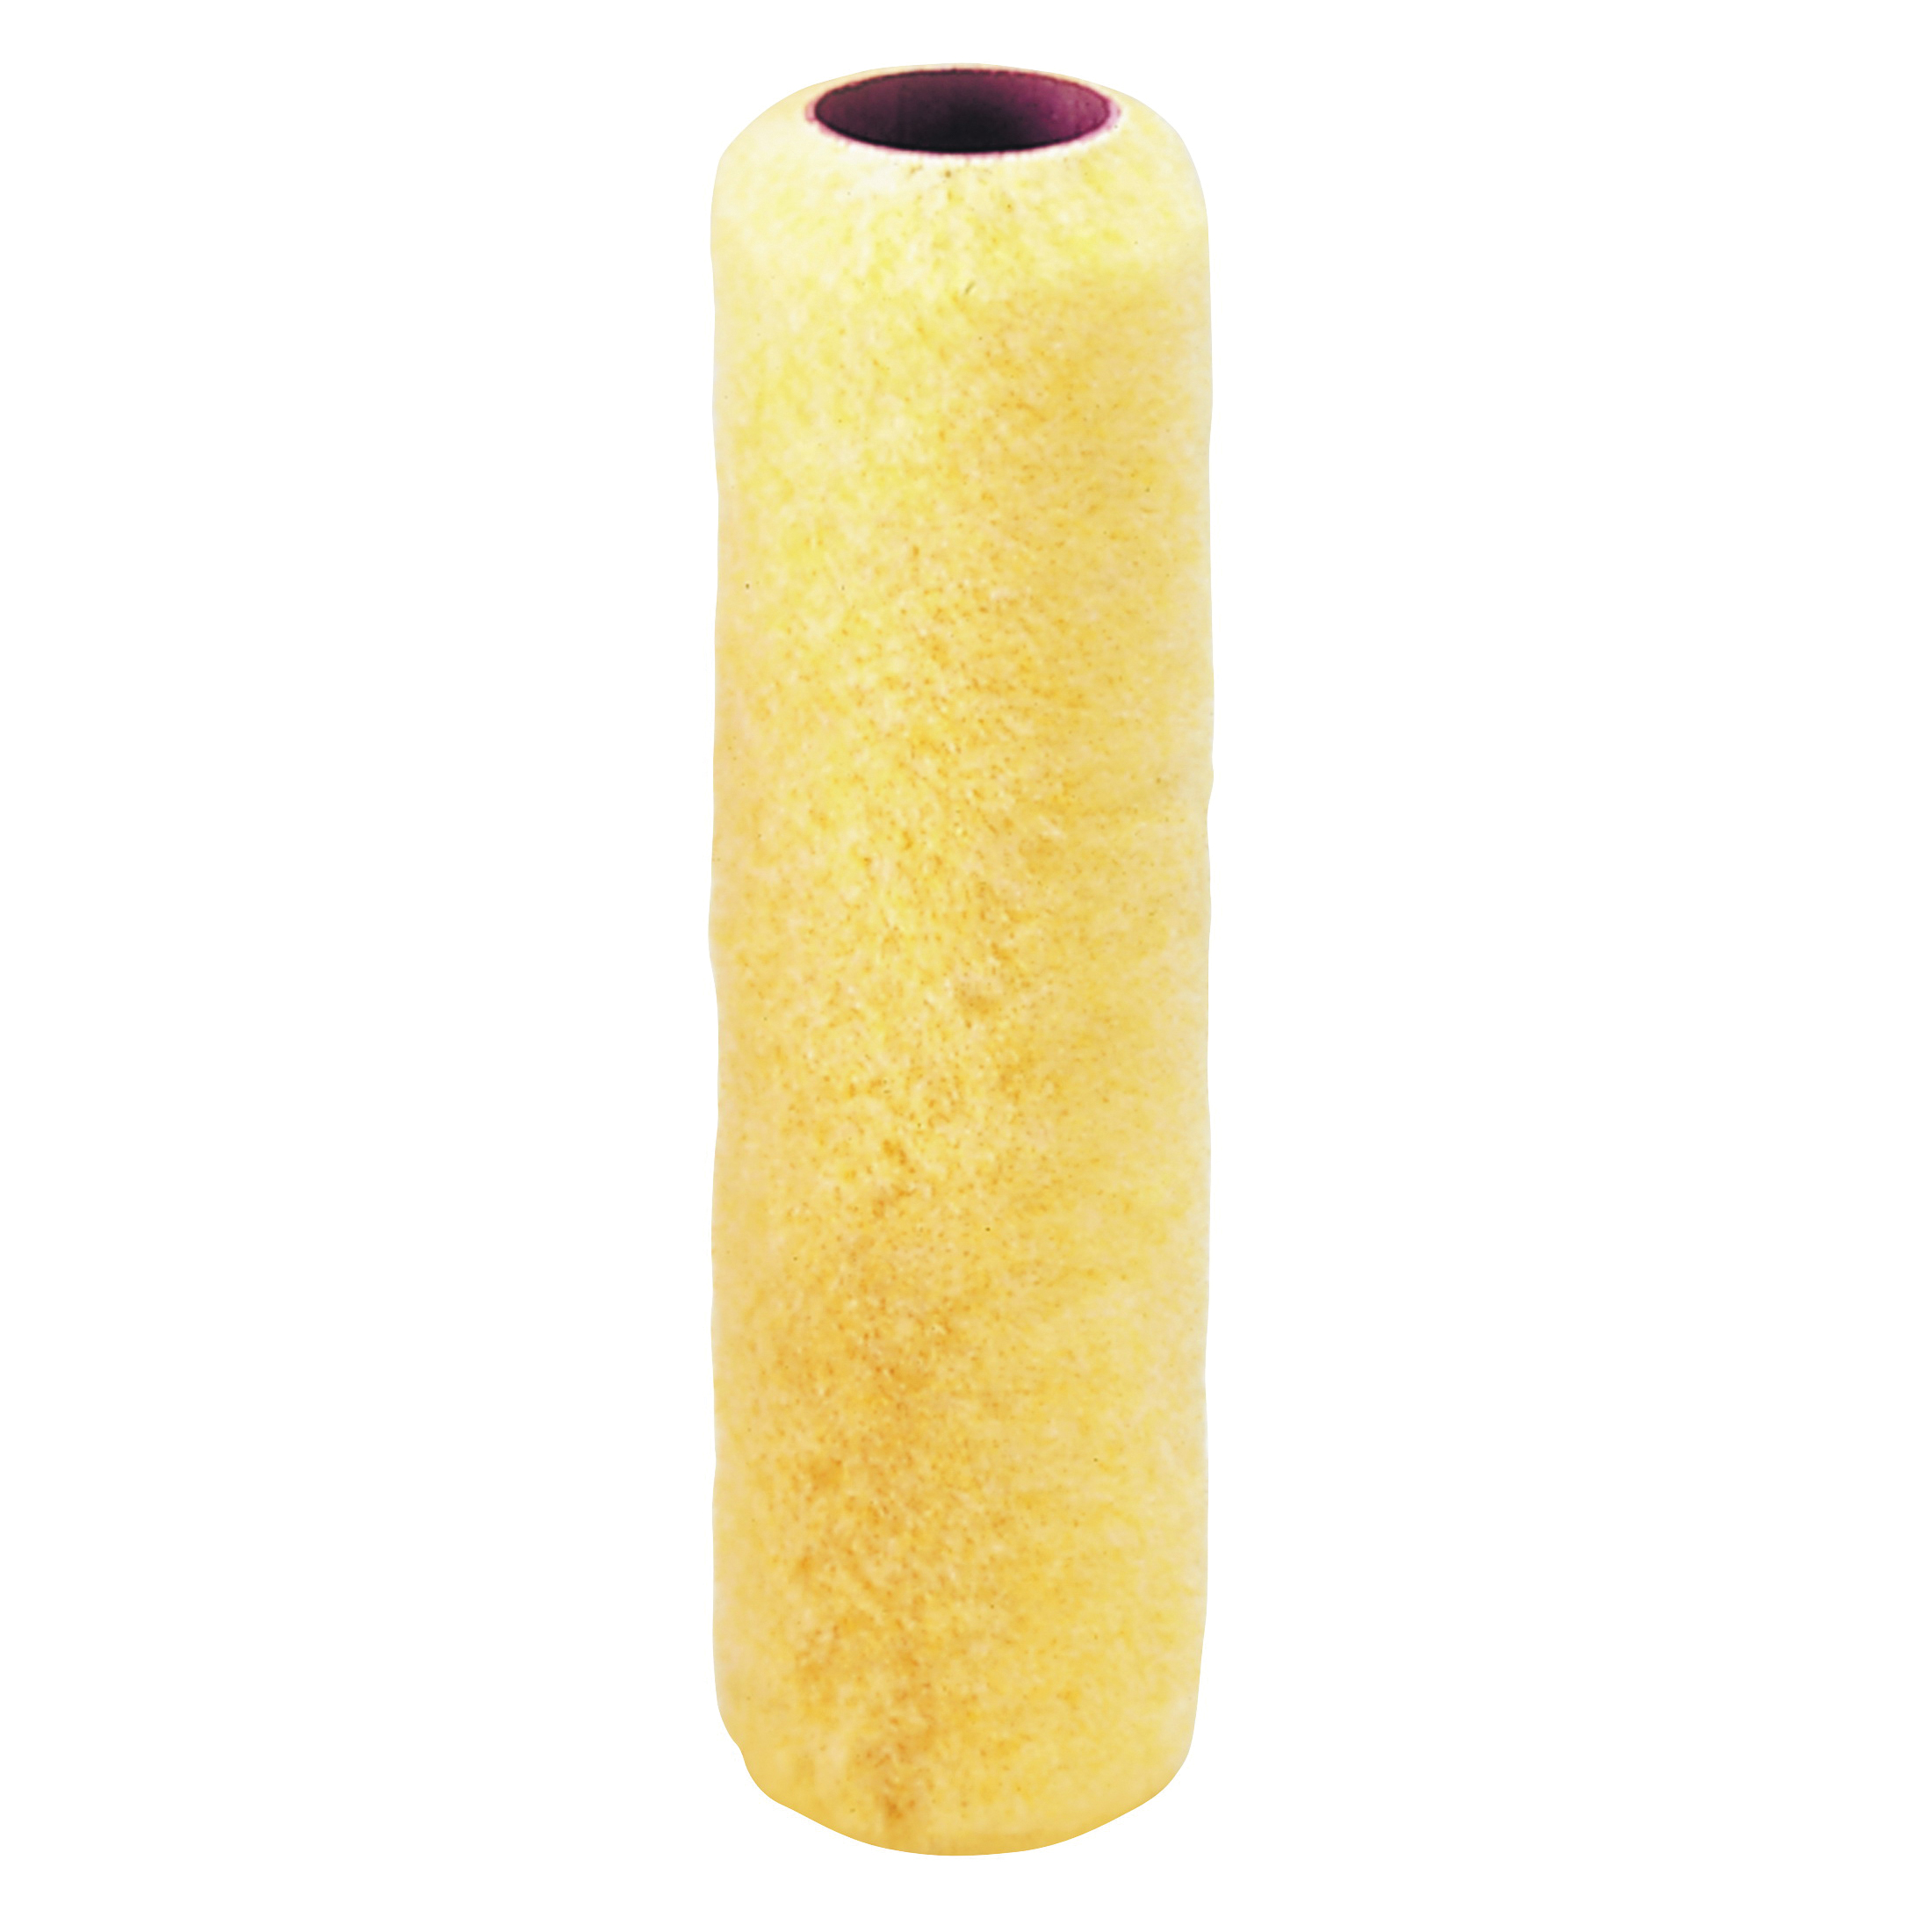 0155208 Paint Roller Cover, 3/4 in Thick Nap, 9 in L, Synthetic Cover